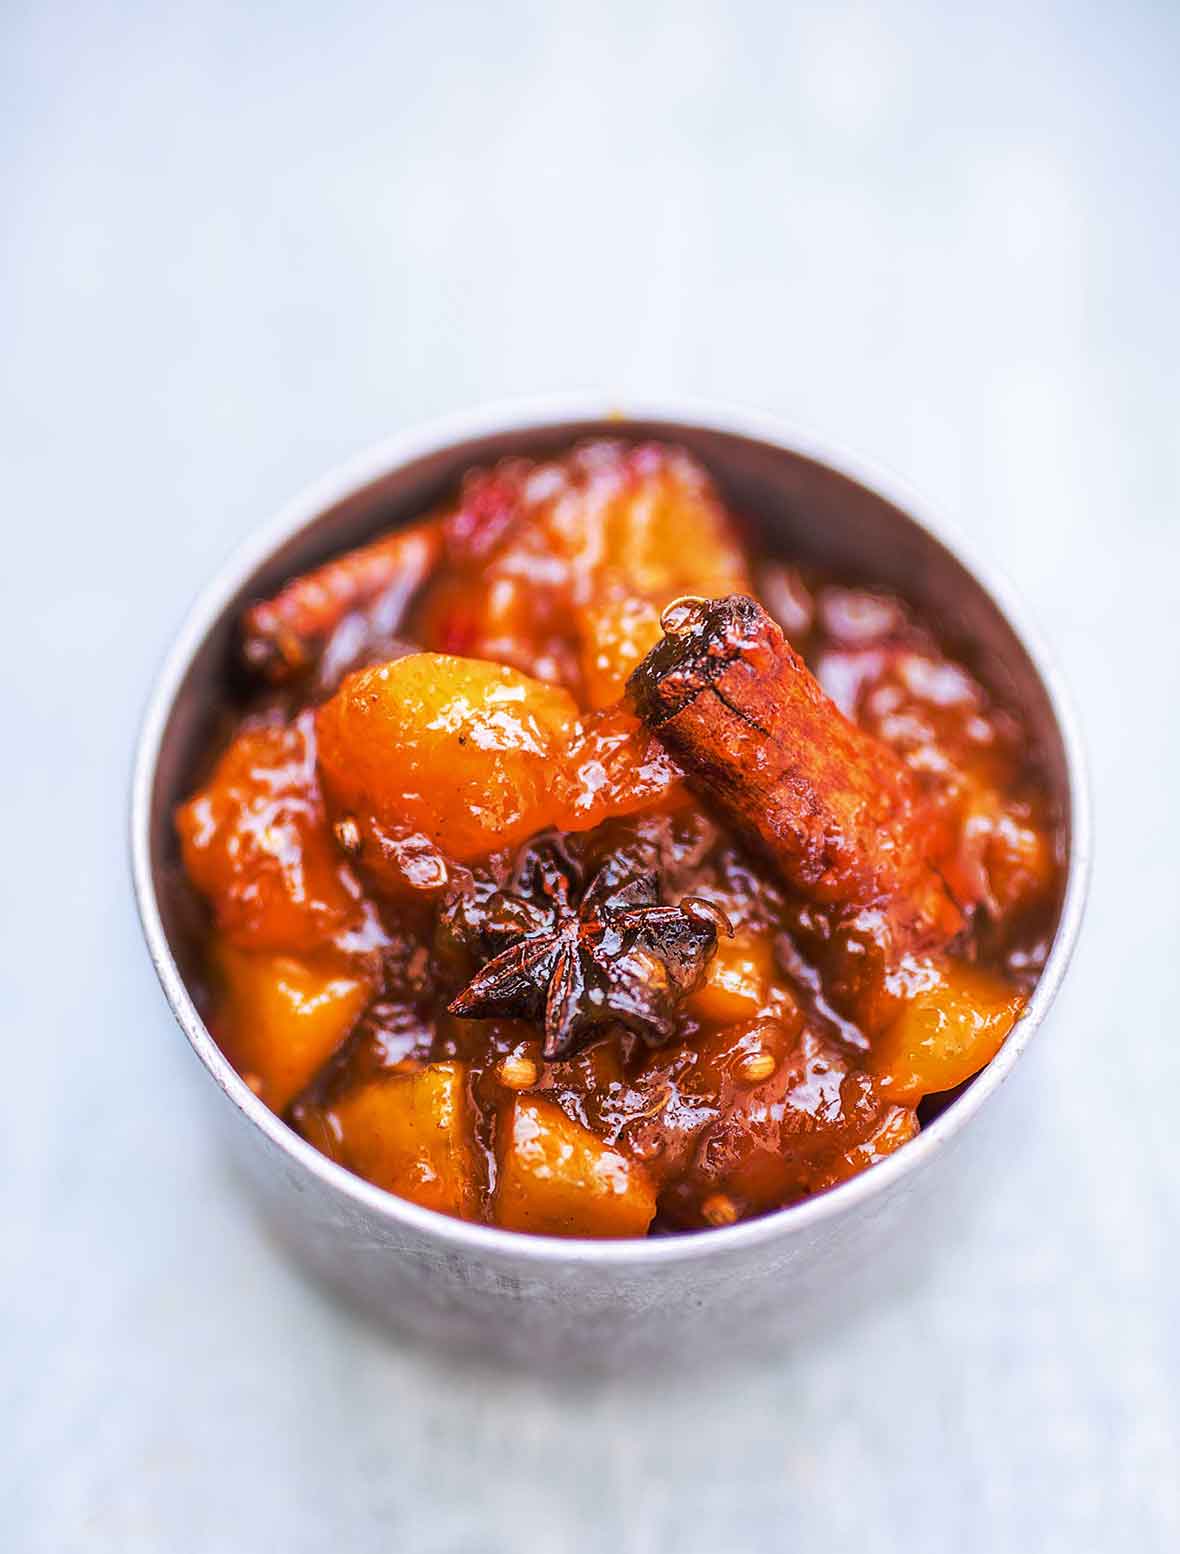 A bowl filled with mango chutney, with visible pieces of cinnamon and star anise